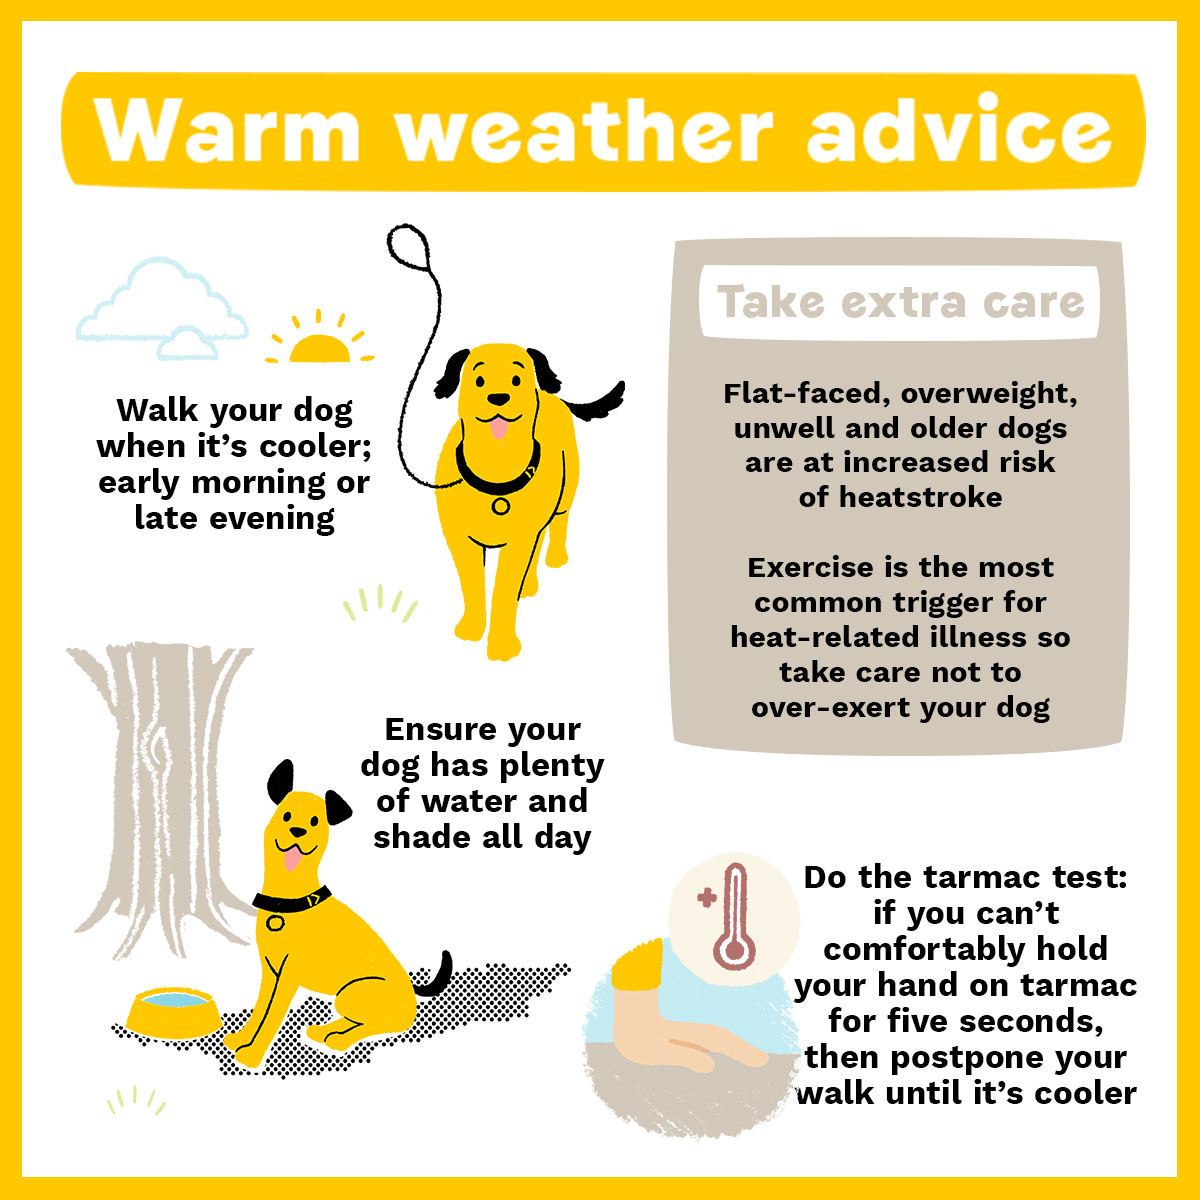 Are you due some warm weather this week? Then it's the pawfect time to remind yourself how you can keep your dog safe during the sunny spell 🌞🐕 More advice here 👉 bit.ly/4b4vi0V